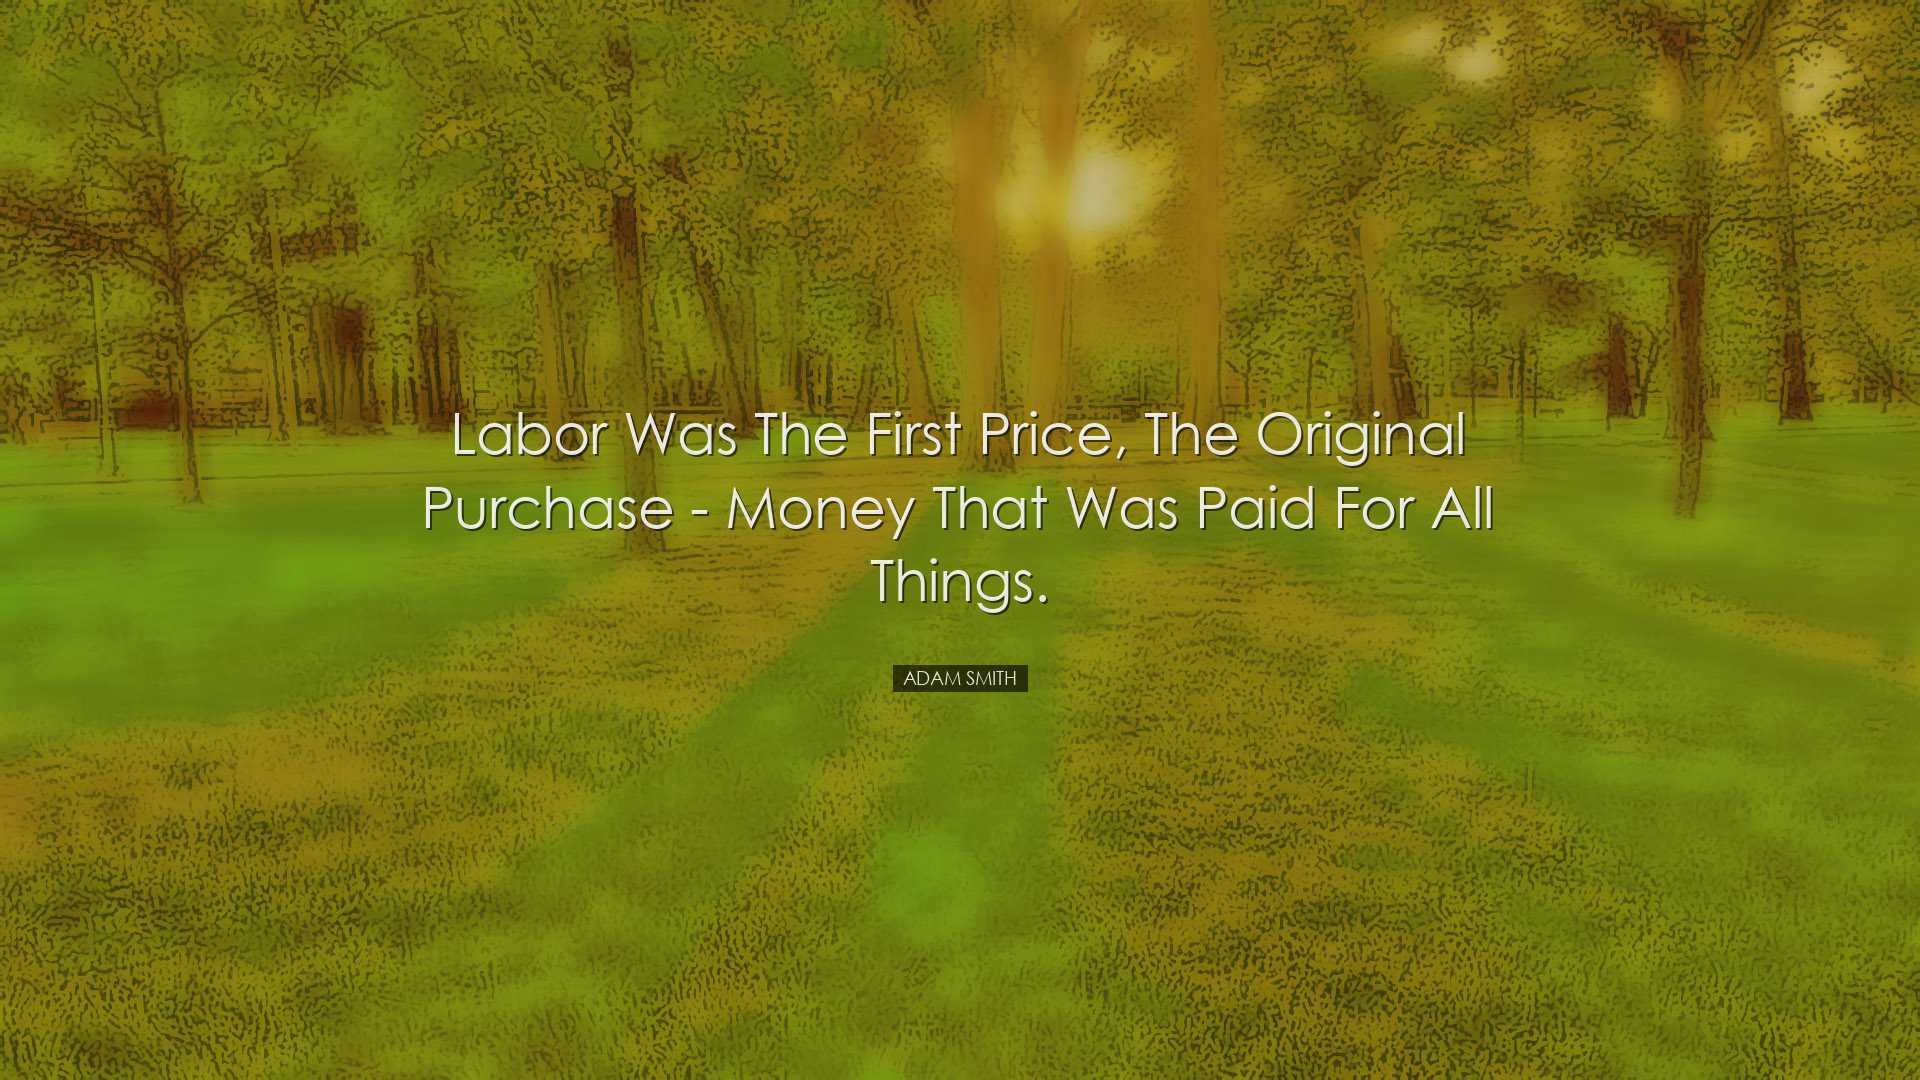 Labor was the first price, the original purchase - money that was